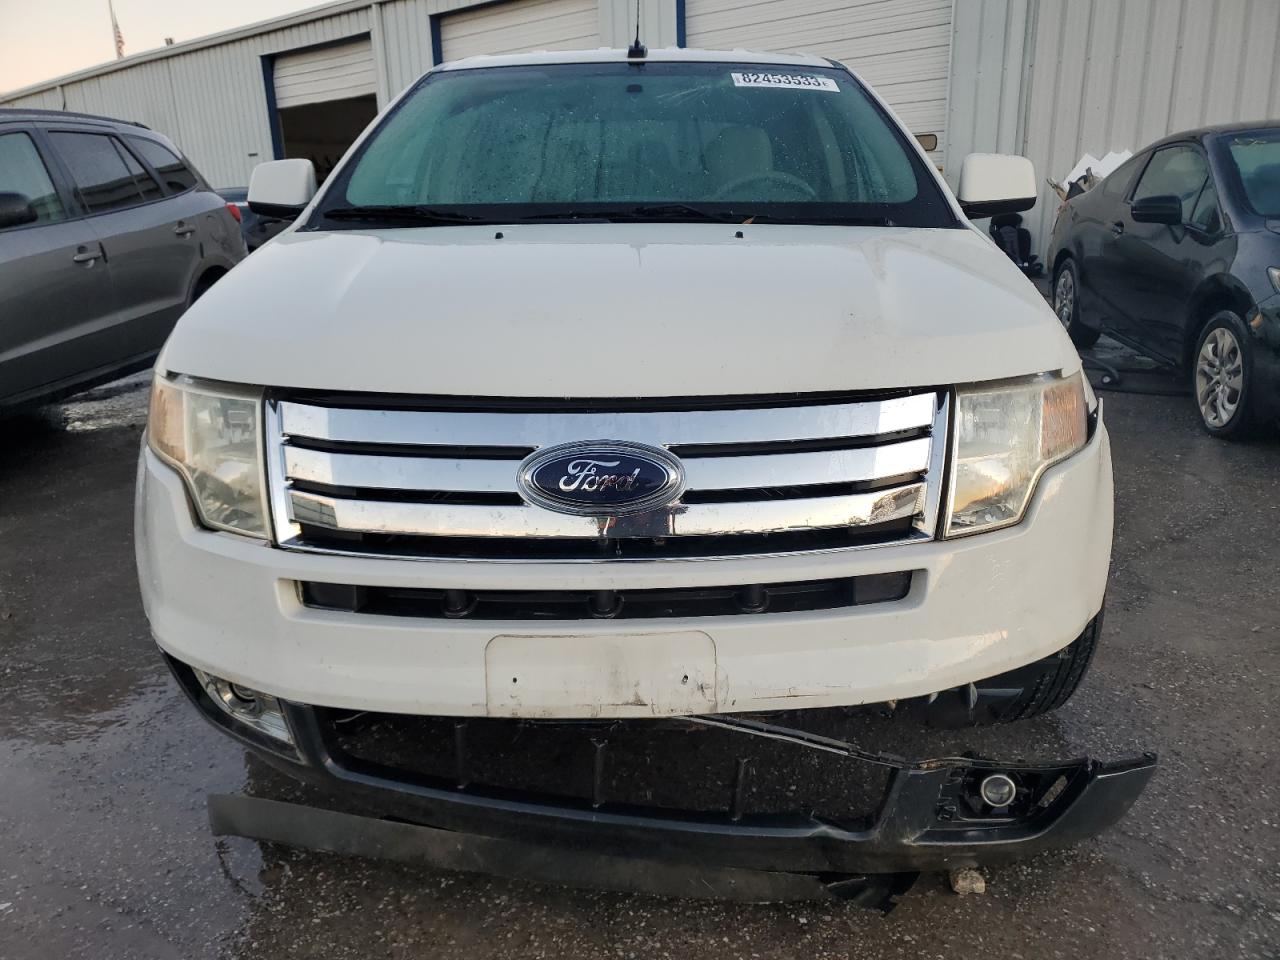 2FMDK3JC6AB****** Used and Repairable 2010 Ford Edge in Alabama State